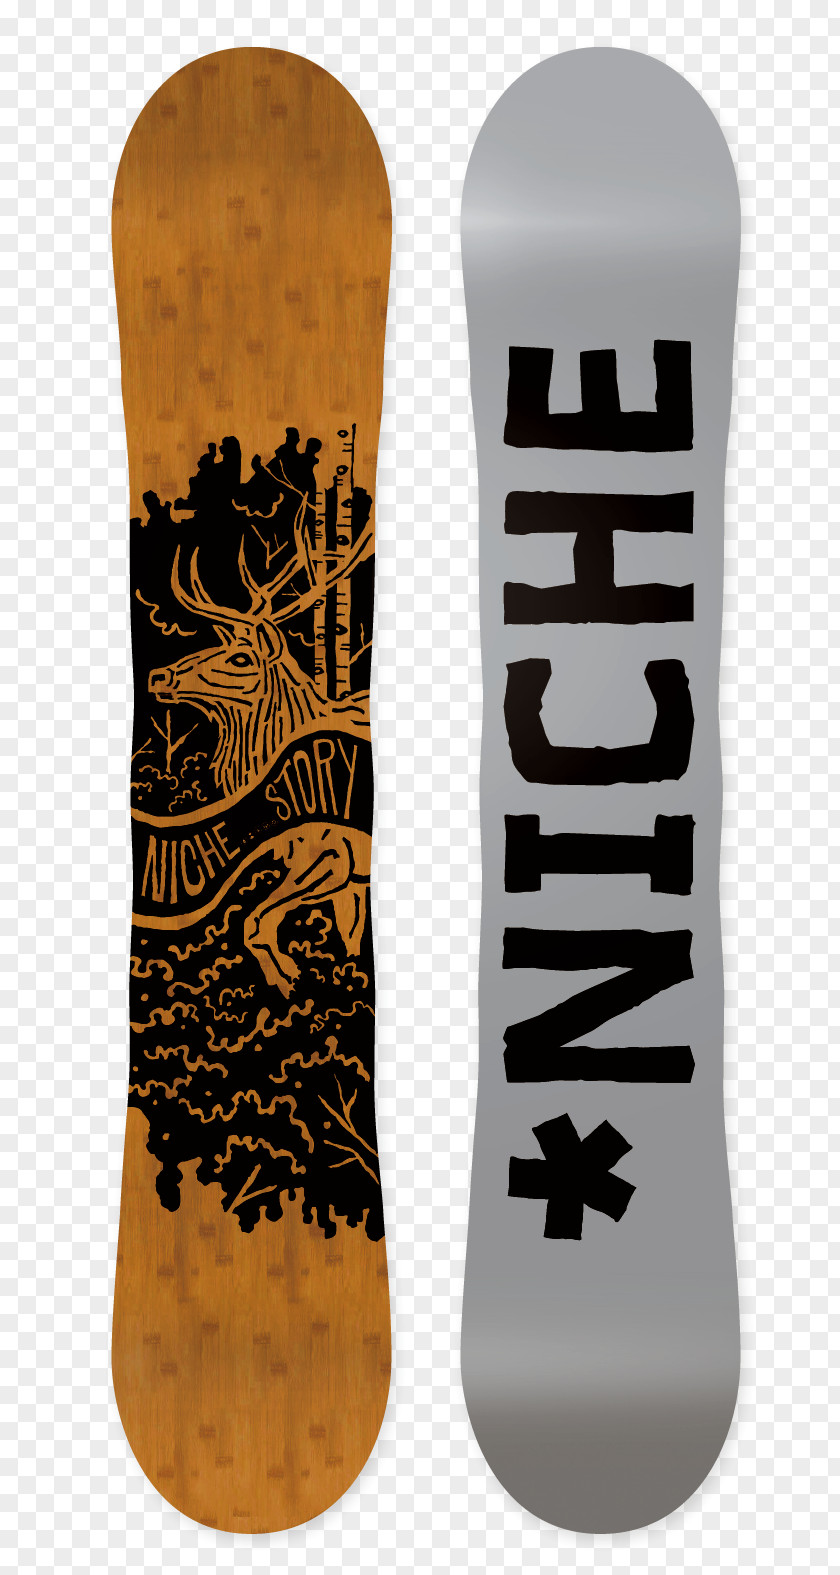 Snowboard Graphic Design Printing PNG